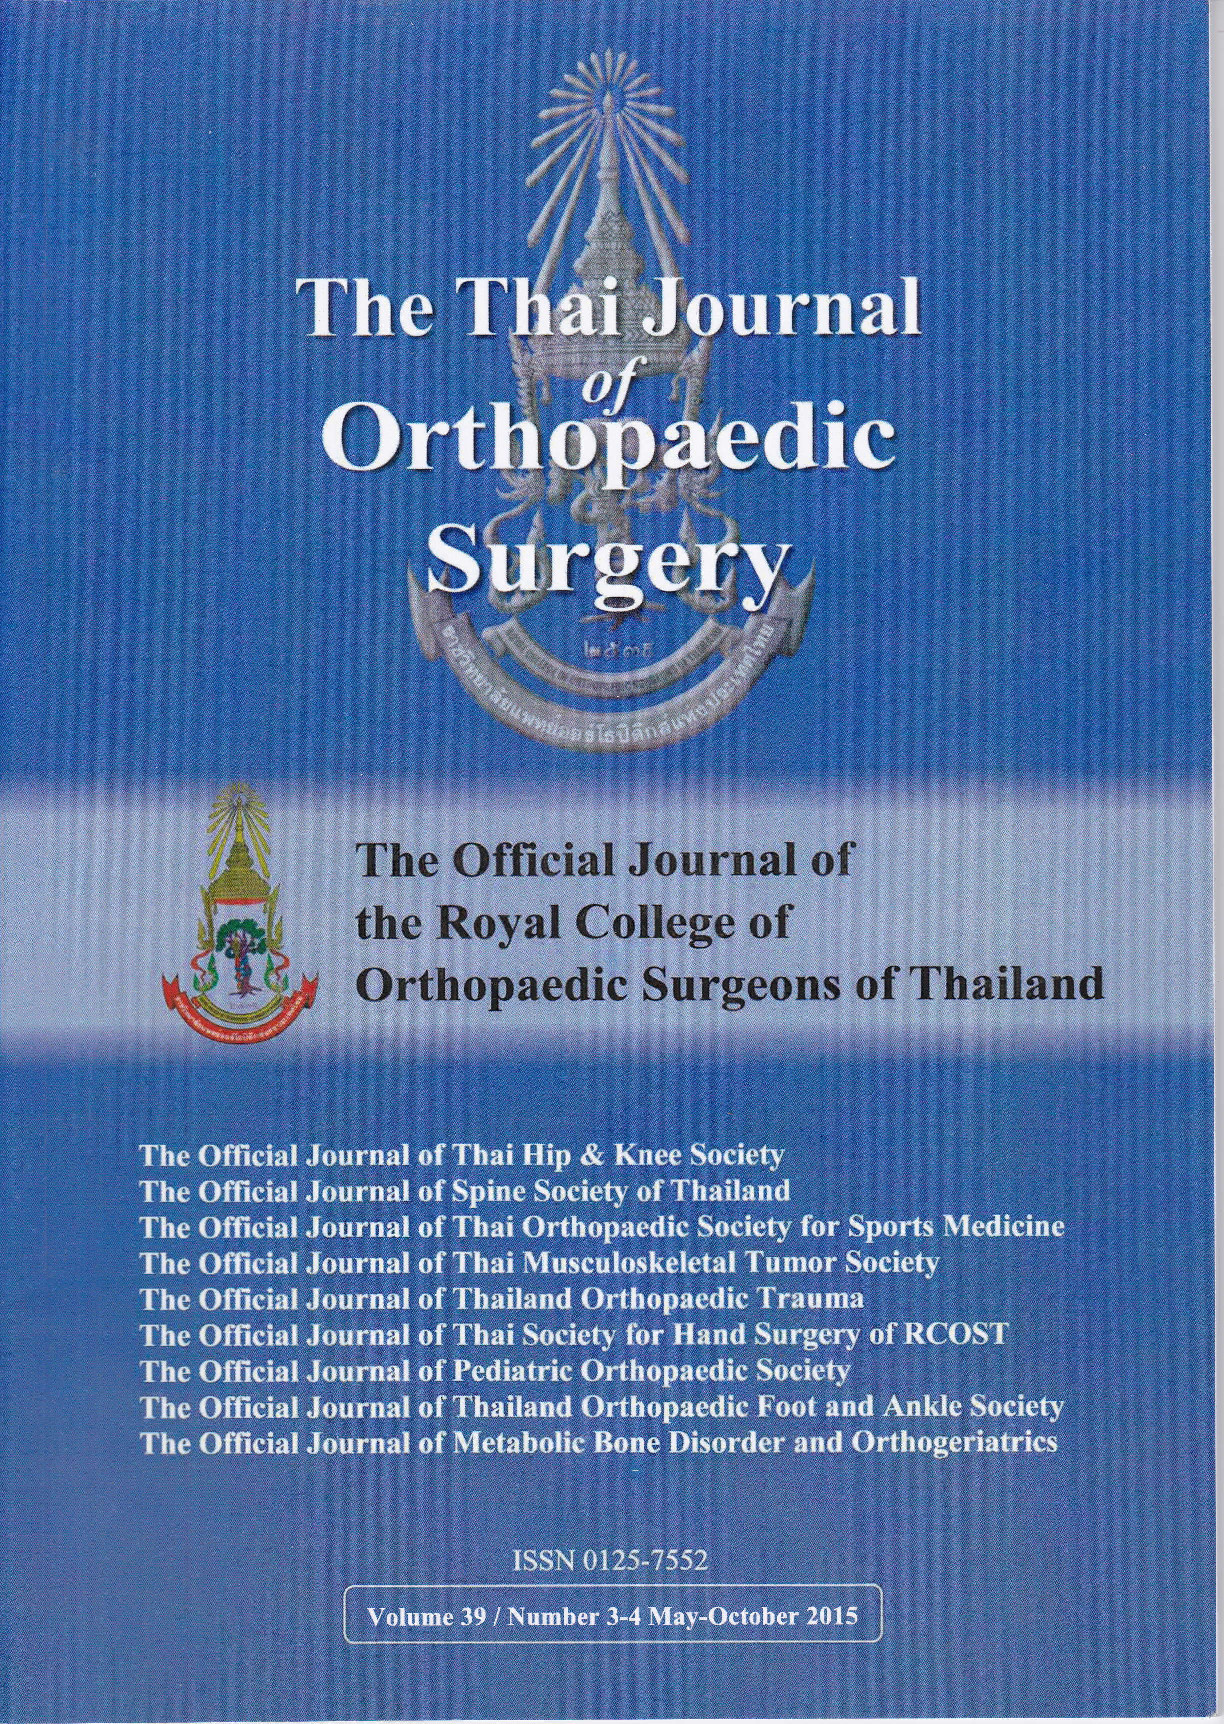 The Unstable Trochanteric Fractures Treated with Proximal Femoral Nail  Antirotation versus Sliding Hip Screw | The Thai Journal of Orthopaedic  Surgery